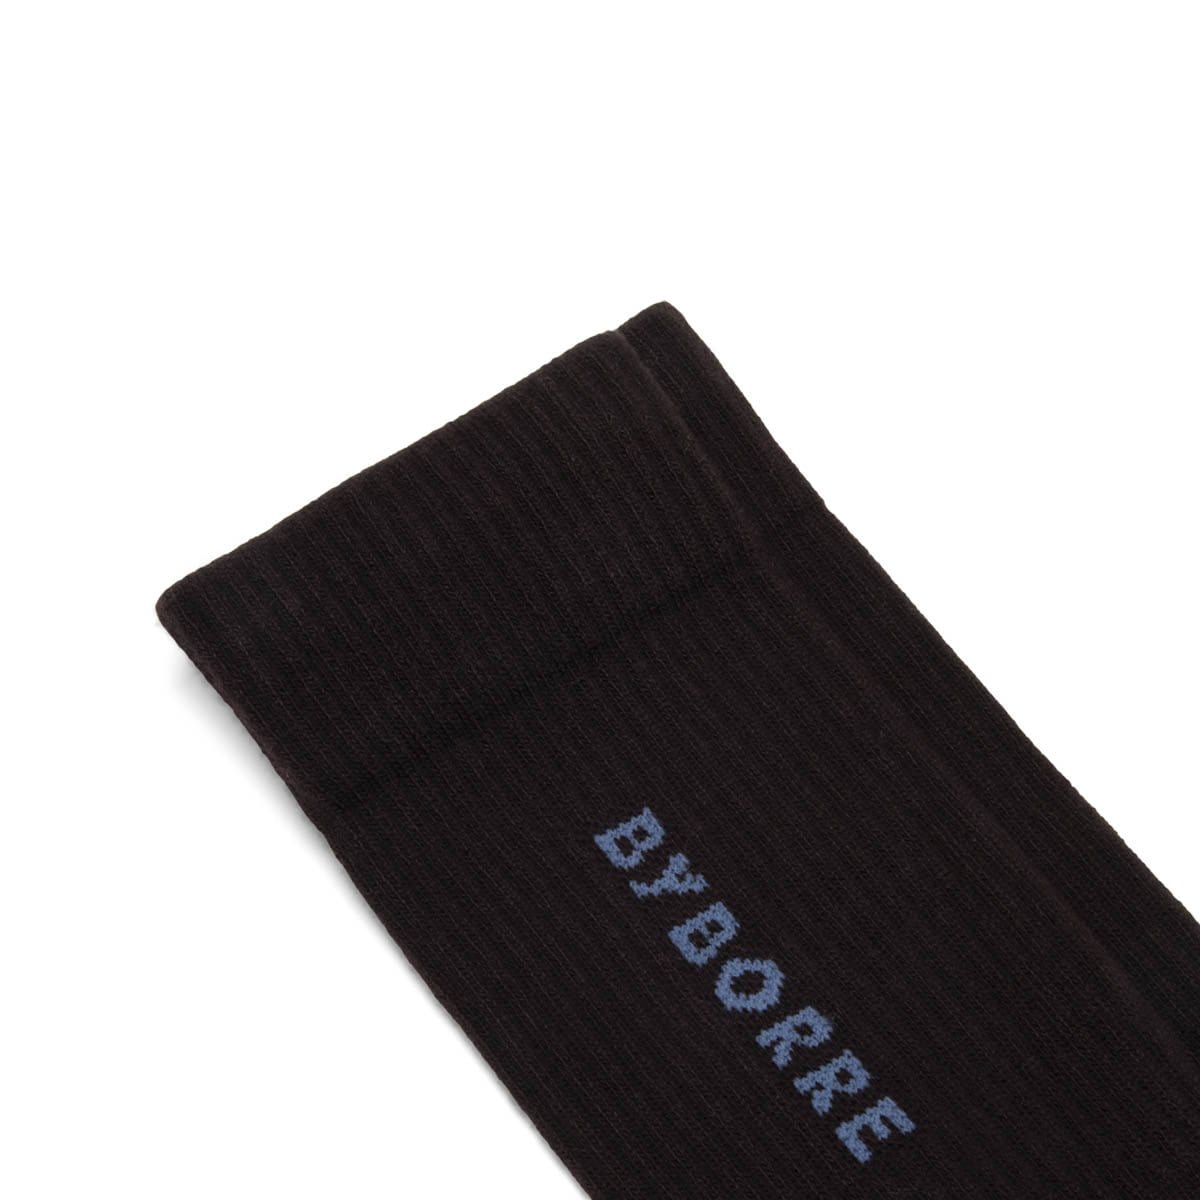 BYBORRE Bags & Accessories COTTON BROWN / OS CORROSION SOCKS